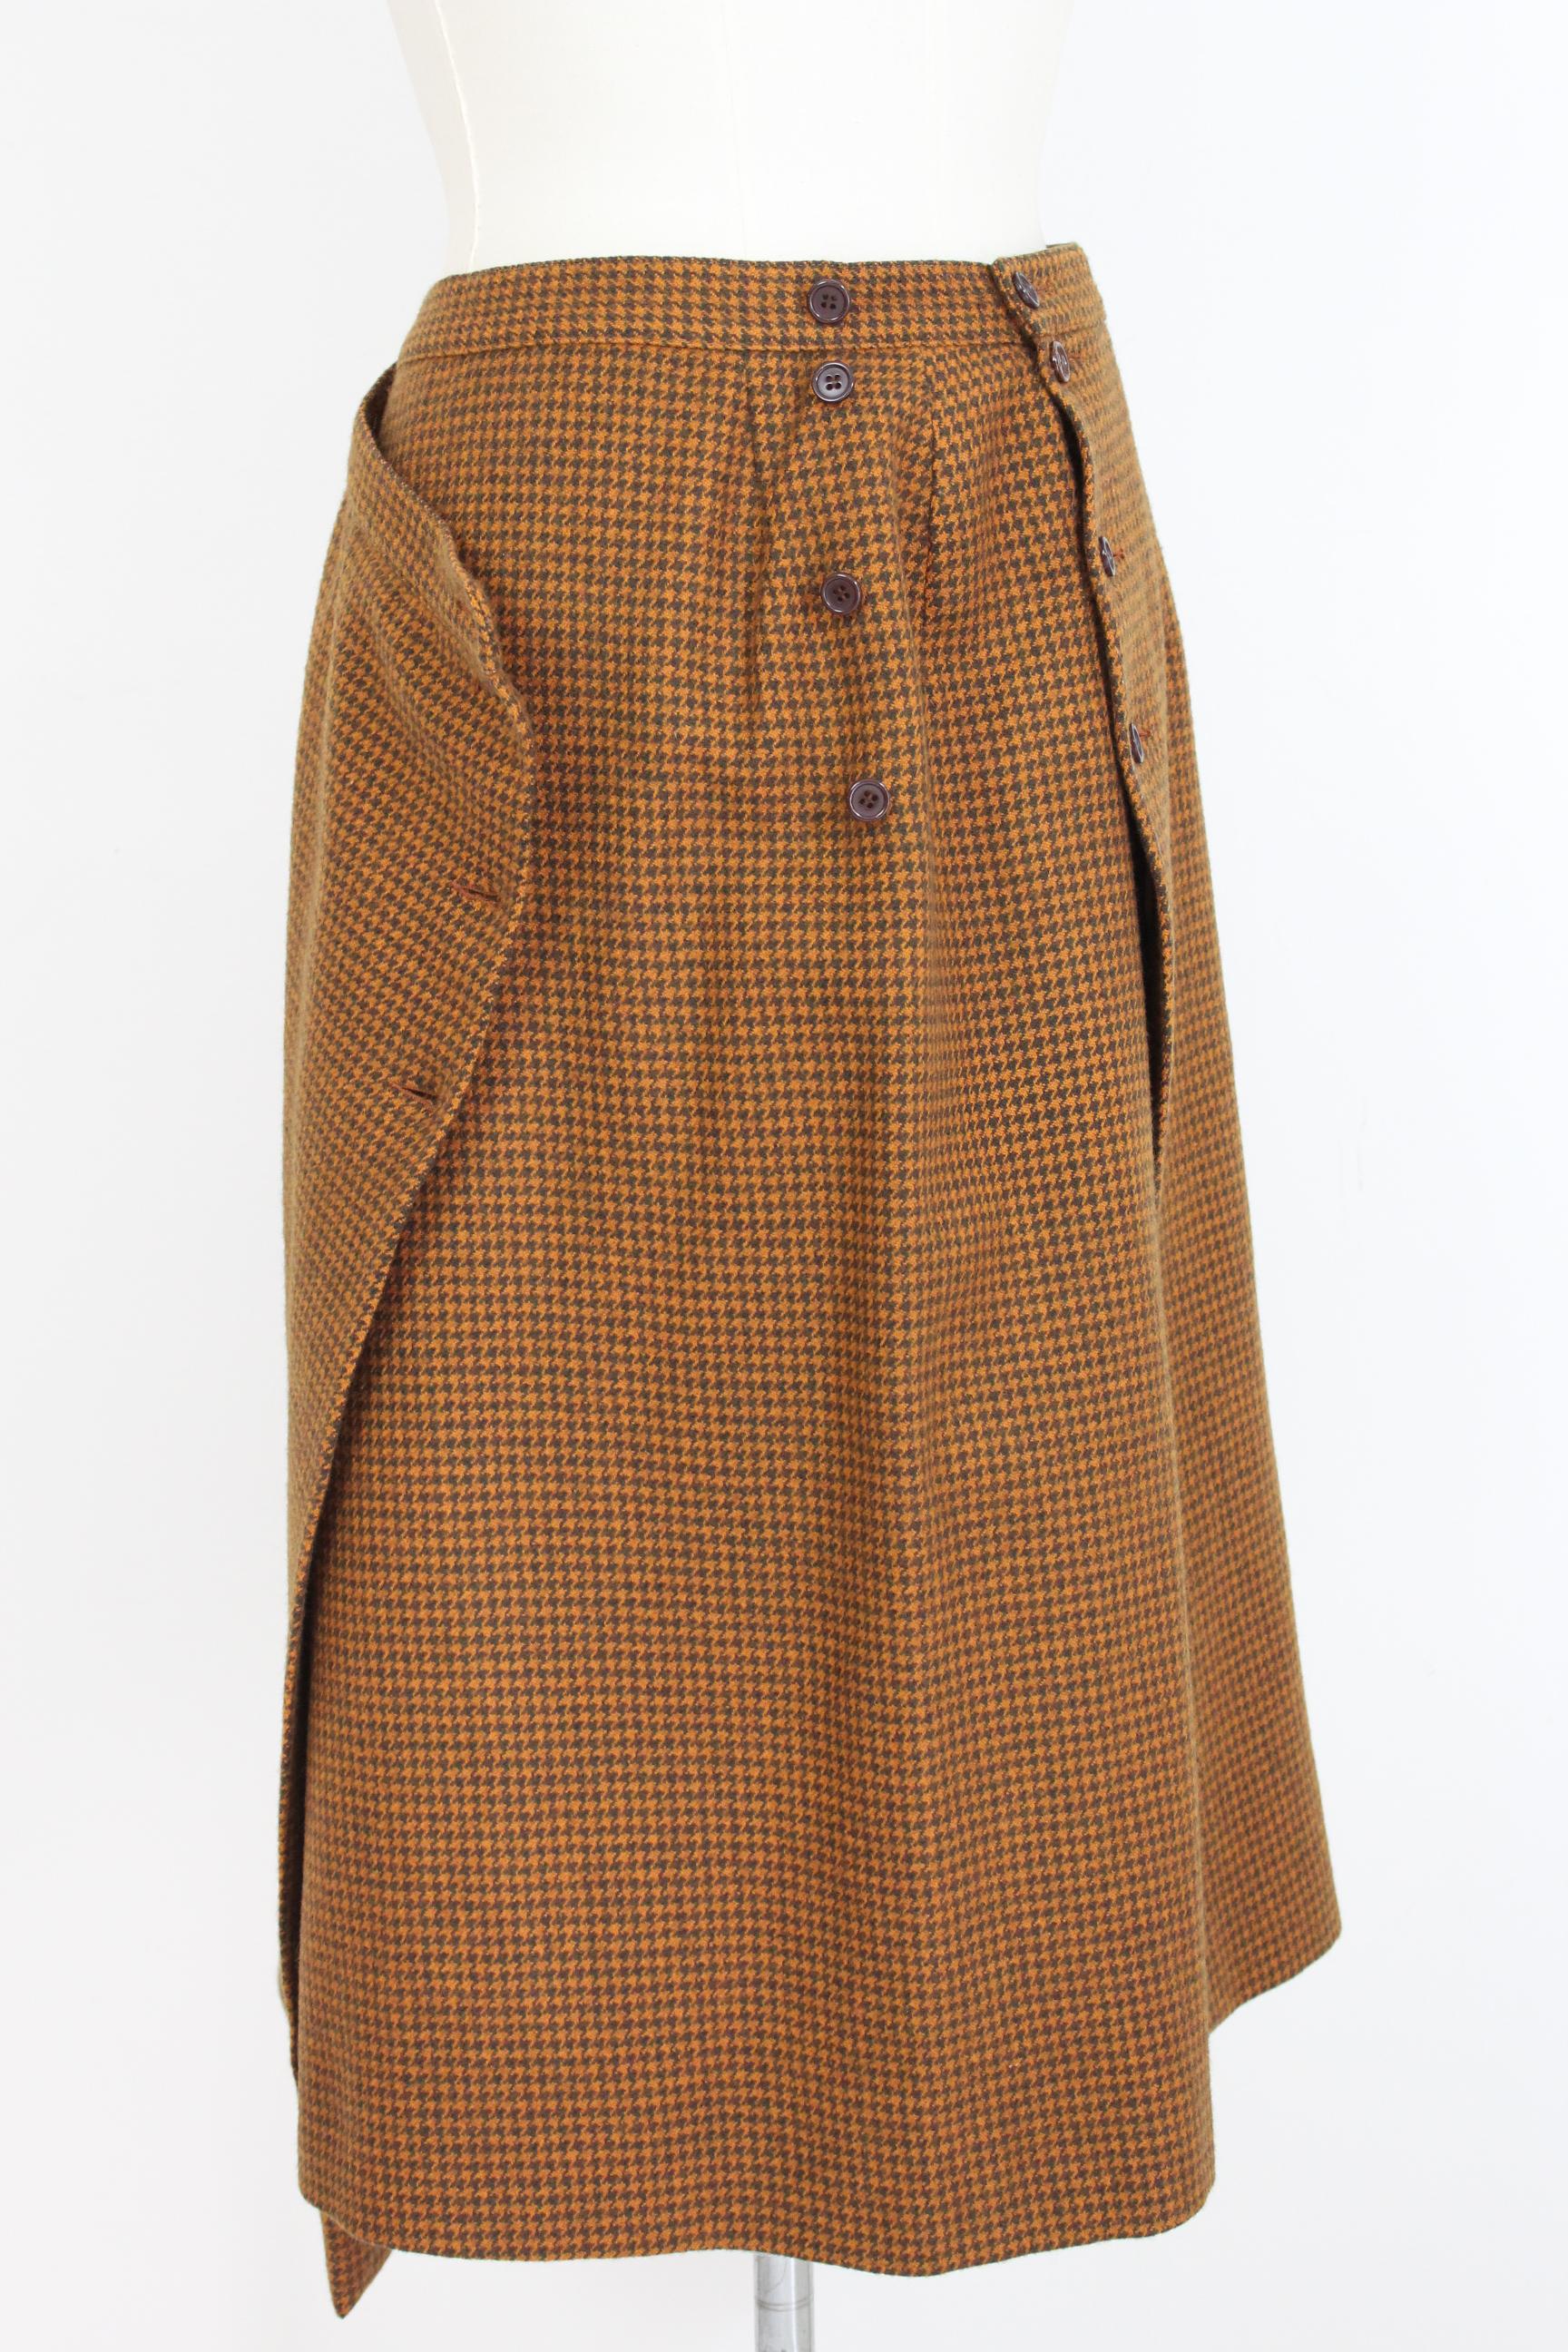 Valentino Miss V Beige Brown Wool Check Double Breasted Jacket Skirt Suit  1